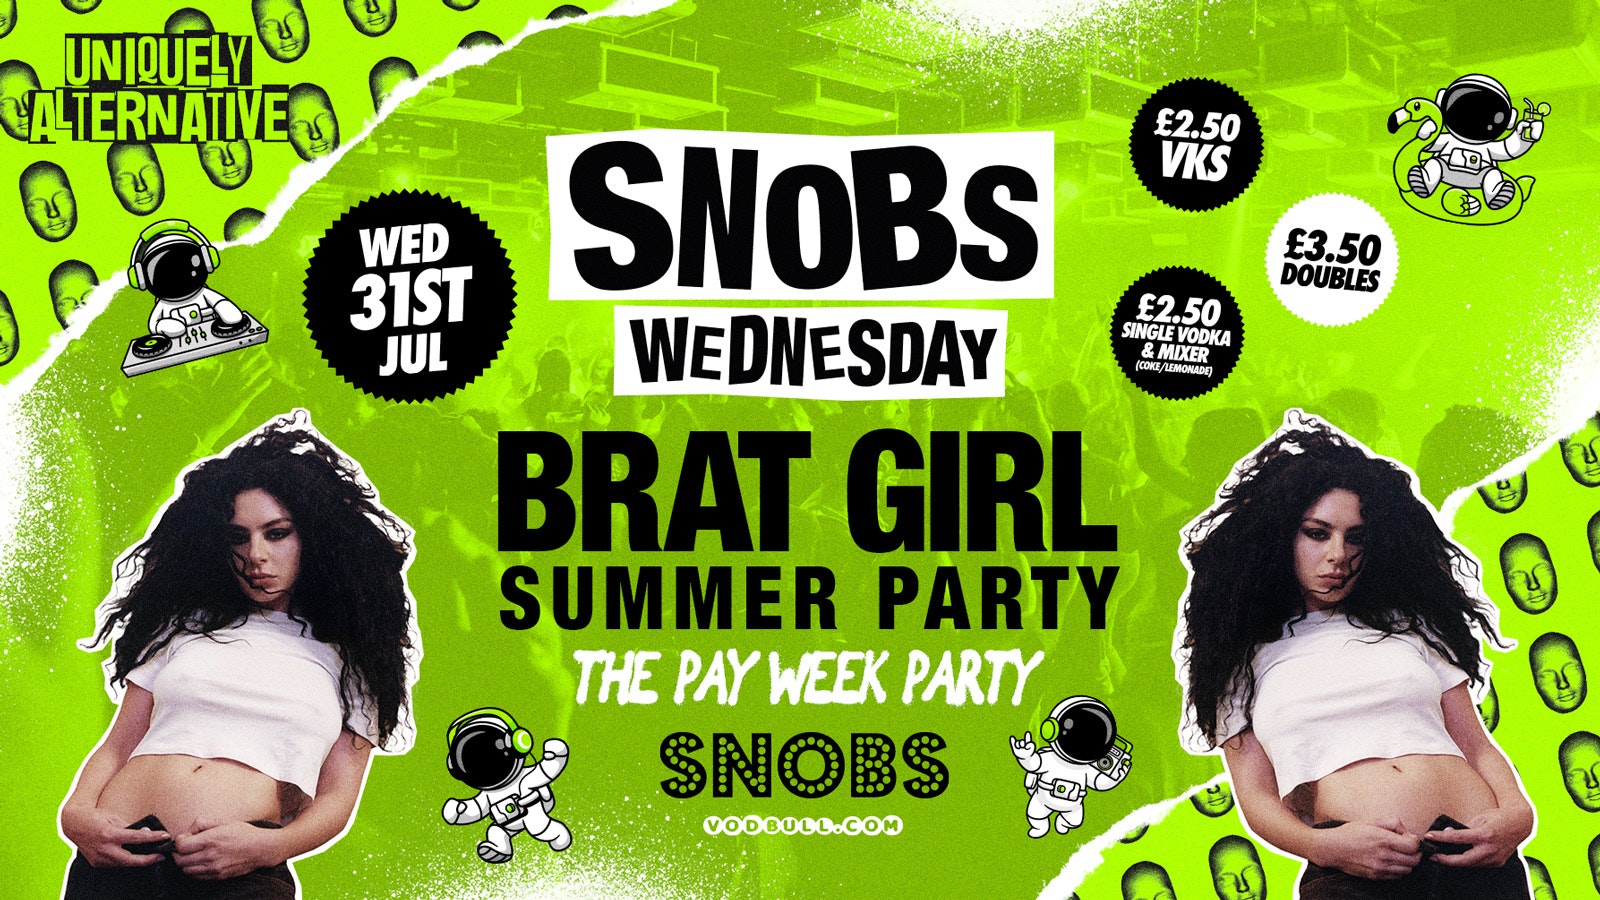 Snobs Wednesday PAY WEEK BRAT GIRL PARTY 31st July